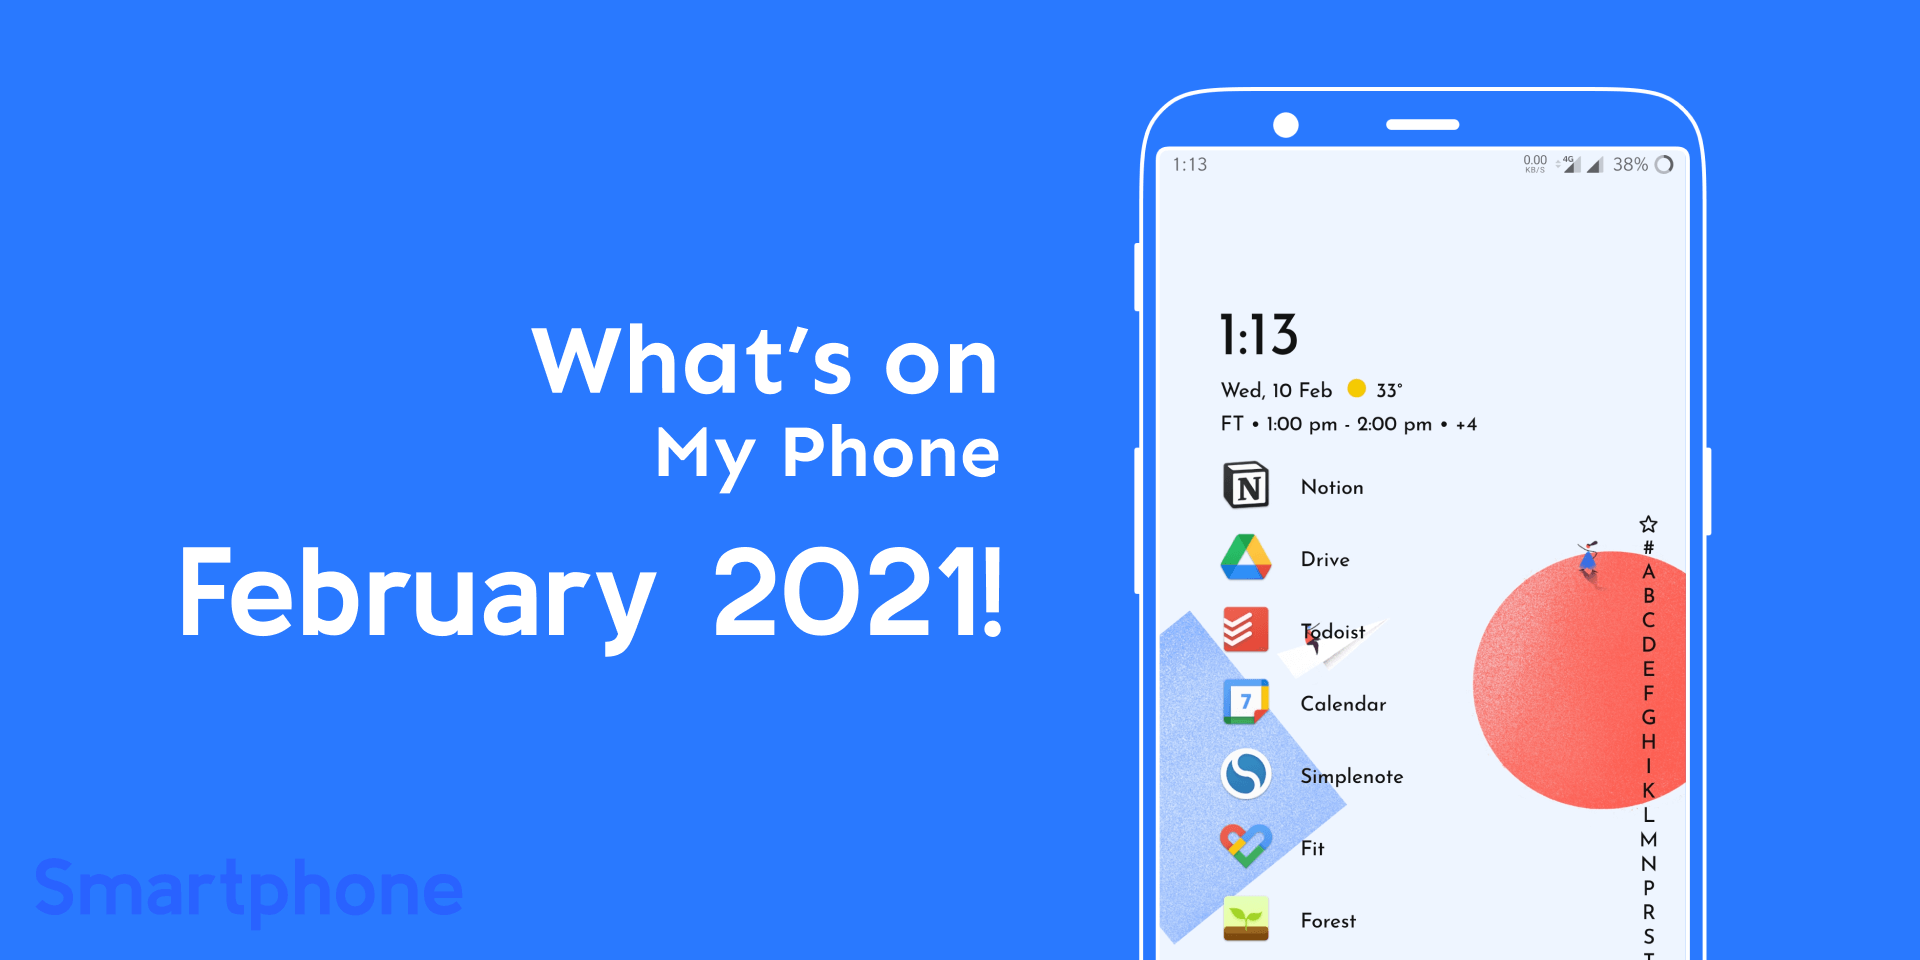 What's on My Phone February 2021!